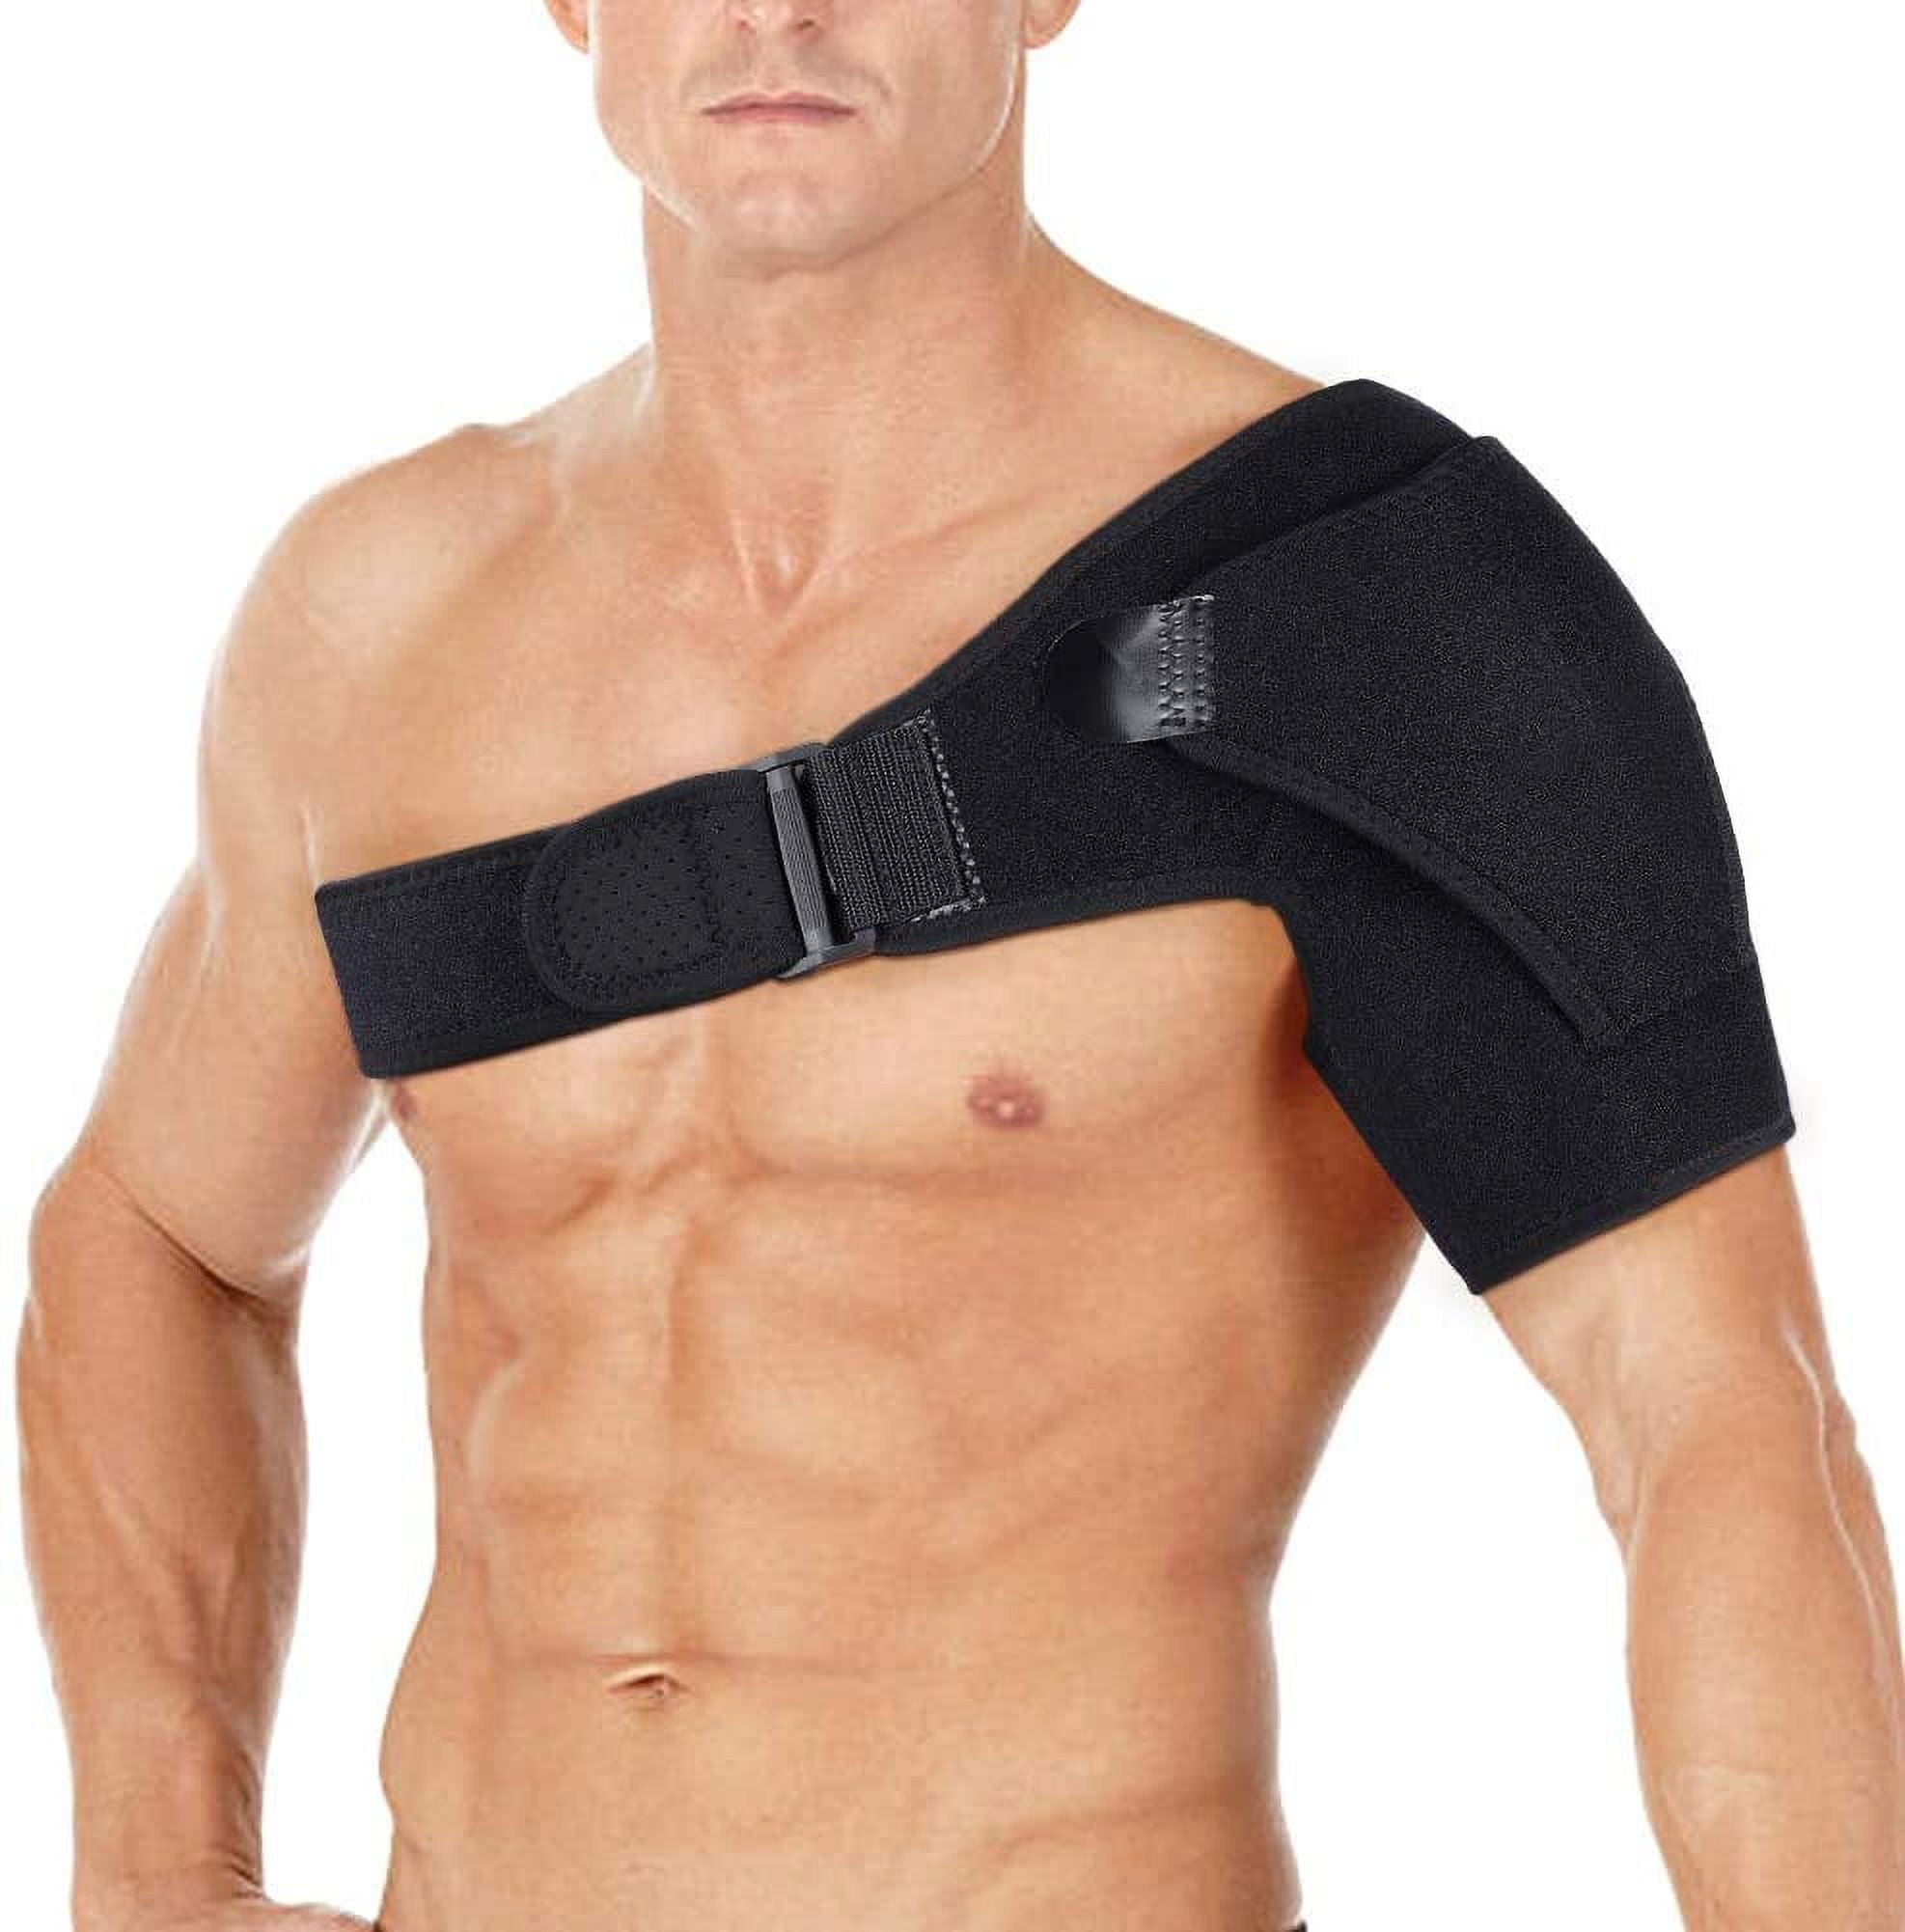 Greensen Unesex Shoulders Brace with Pressure Pad Breathable Shoulder  Support for Rotator Cuff, Breathable Shoulder Support,Shoulder Brace 